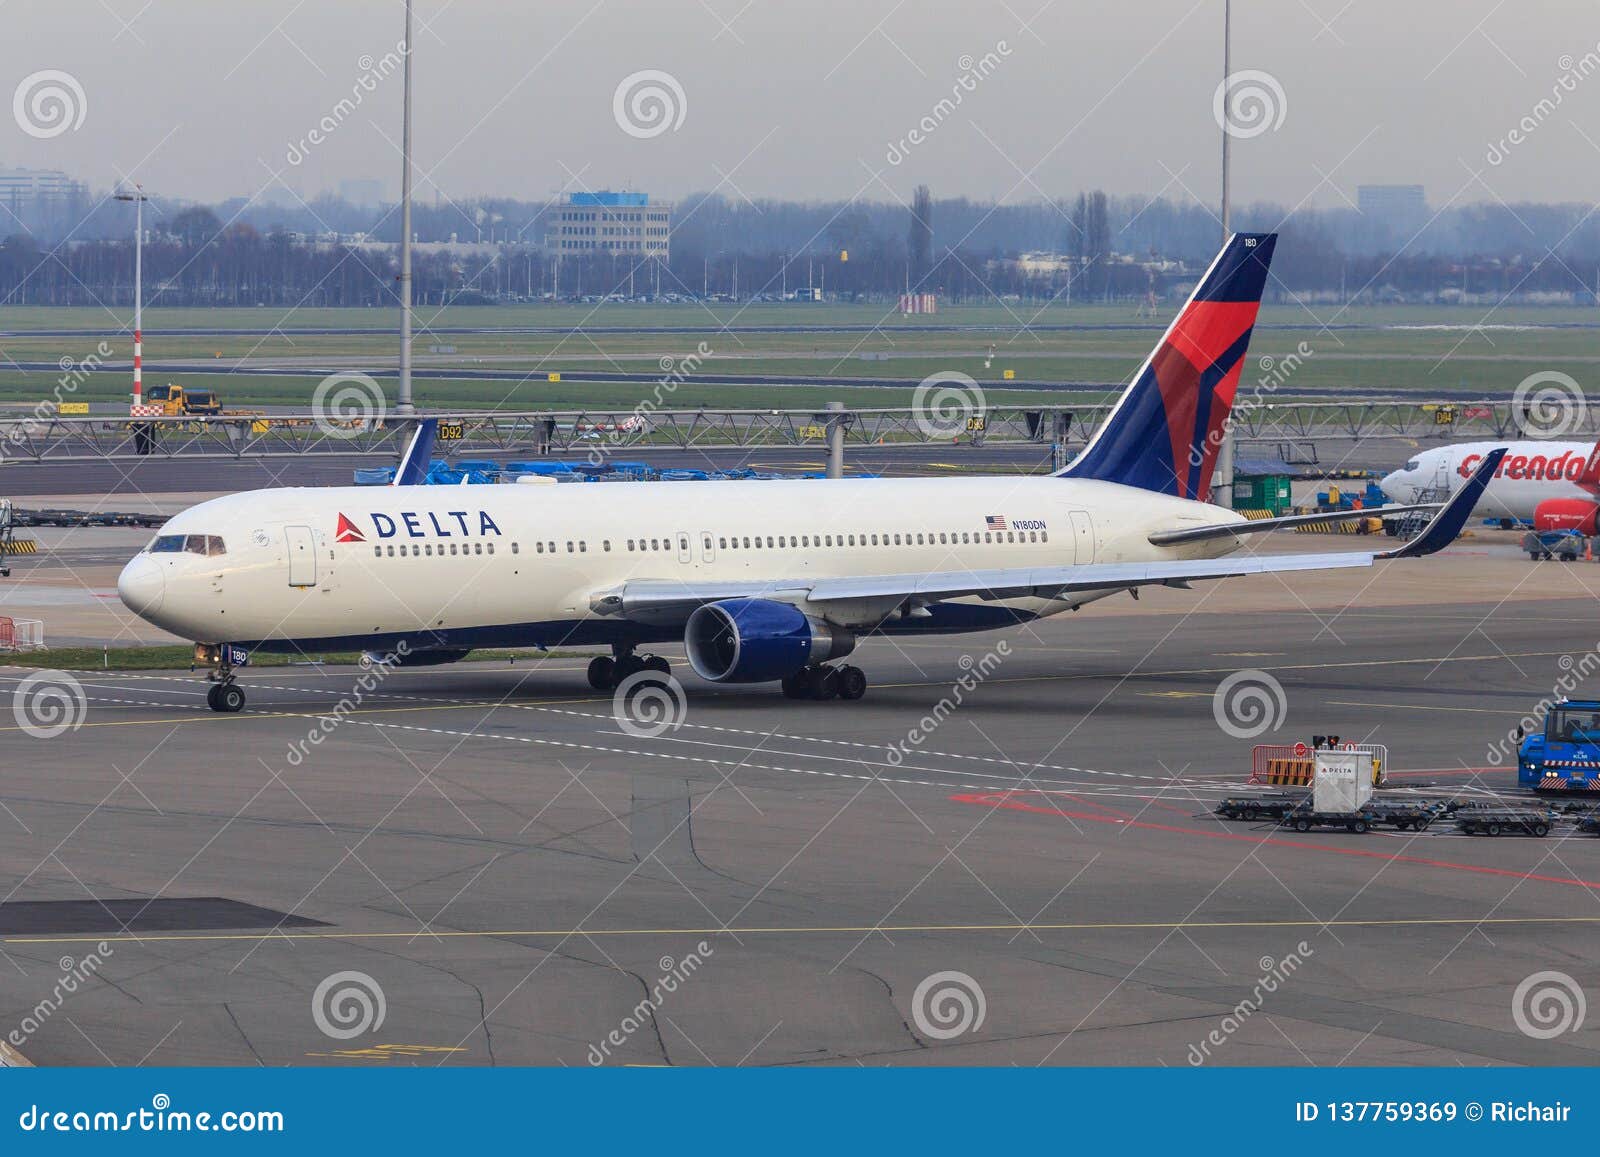 Delta Airlines Airplane Front View